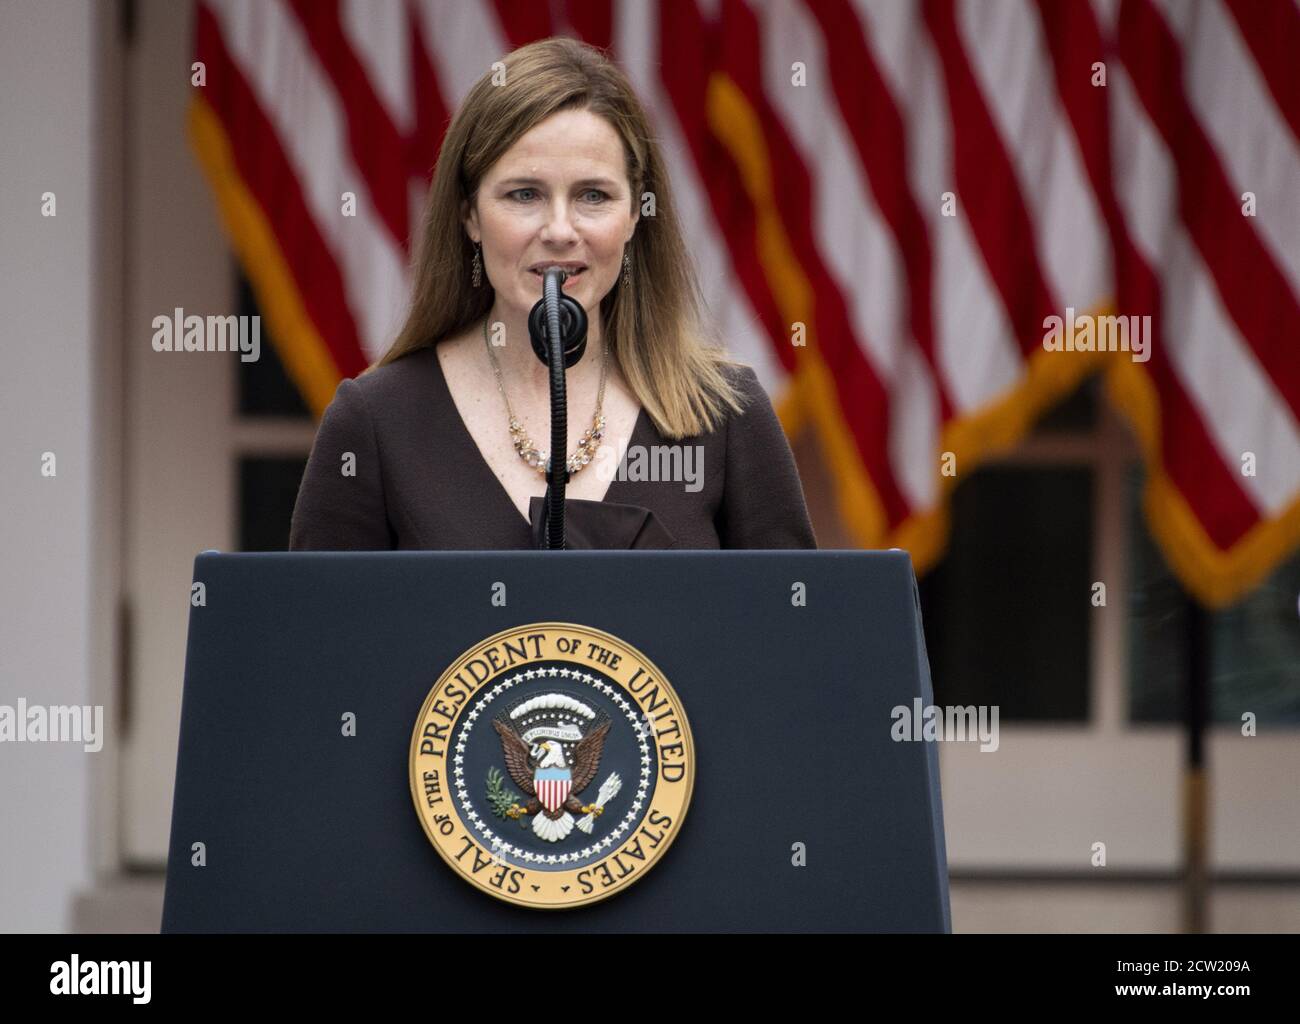 Washington, United States. 26th Sep, 2020. Judge Amy Coney Barrett delivers remarks after President Trump announces her as his Supreme Court Justice Nominee, during a ceremony at the White House in Washington, DC on Saturday, September 26, 2020. Trump is nominating Barrett to replace the seat left by the passing of Justice Ruth Bader Ginsburg, who died last week. Photo by Kevin Dietsch/UPI Credit: UPI/Alamy Live News Stock Photo